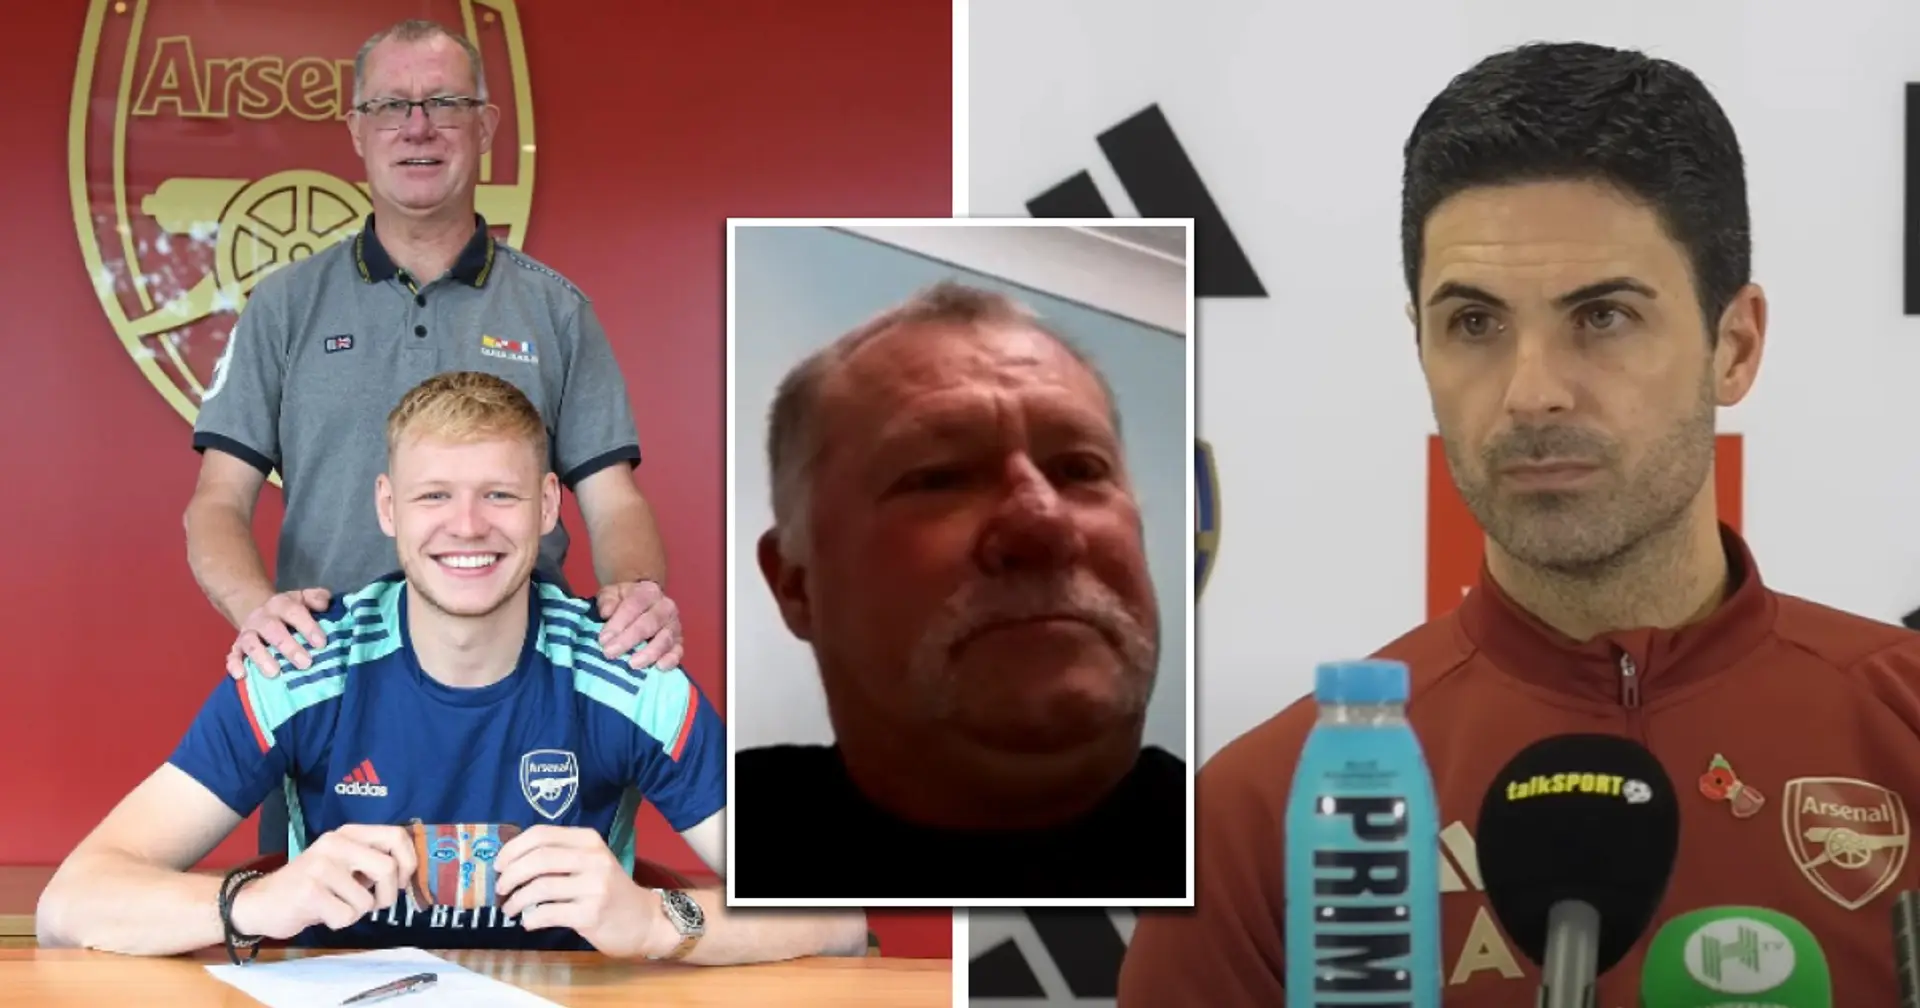 Ramsdale's dad slams Arteta treatment: 'You’ve got to give my son a chance for God’s sake'